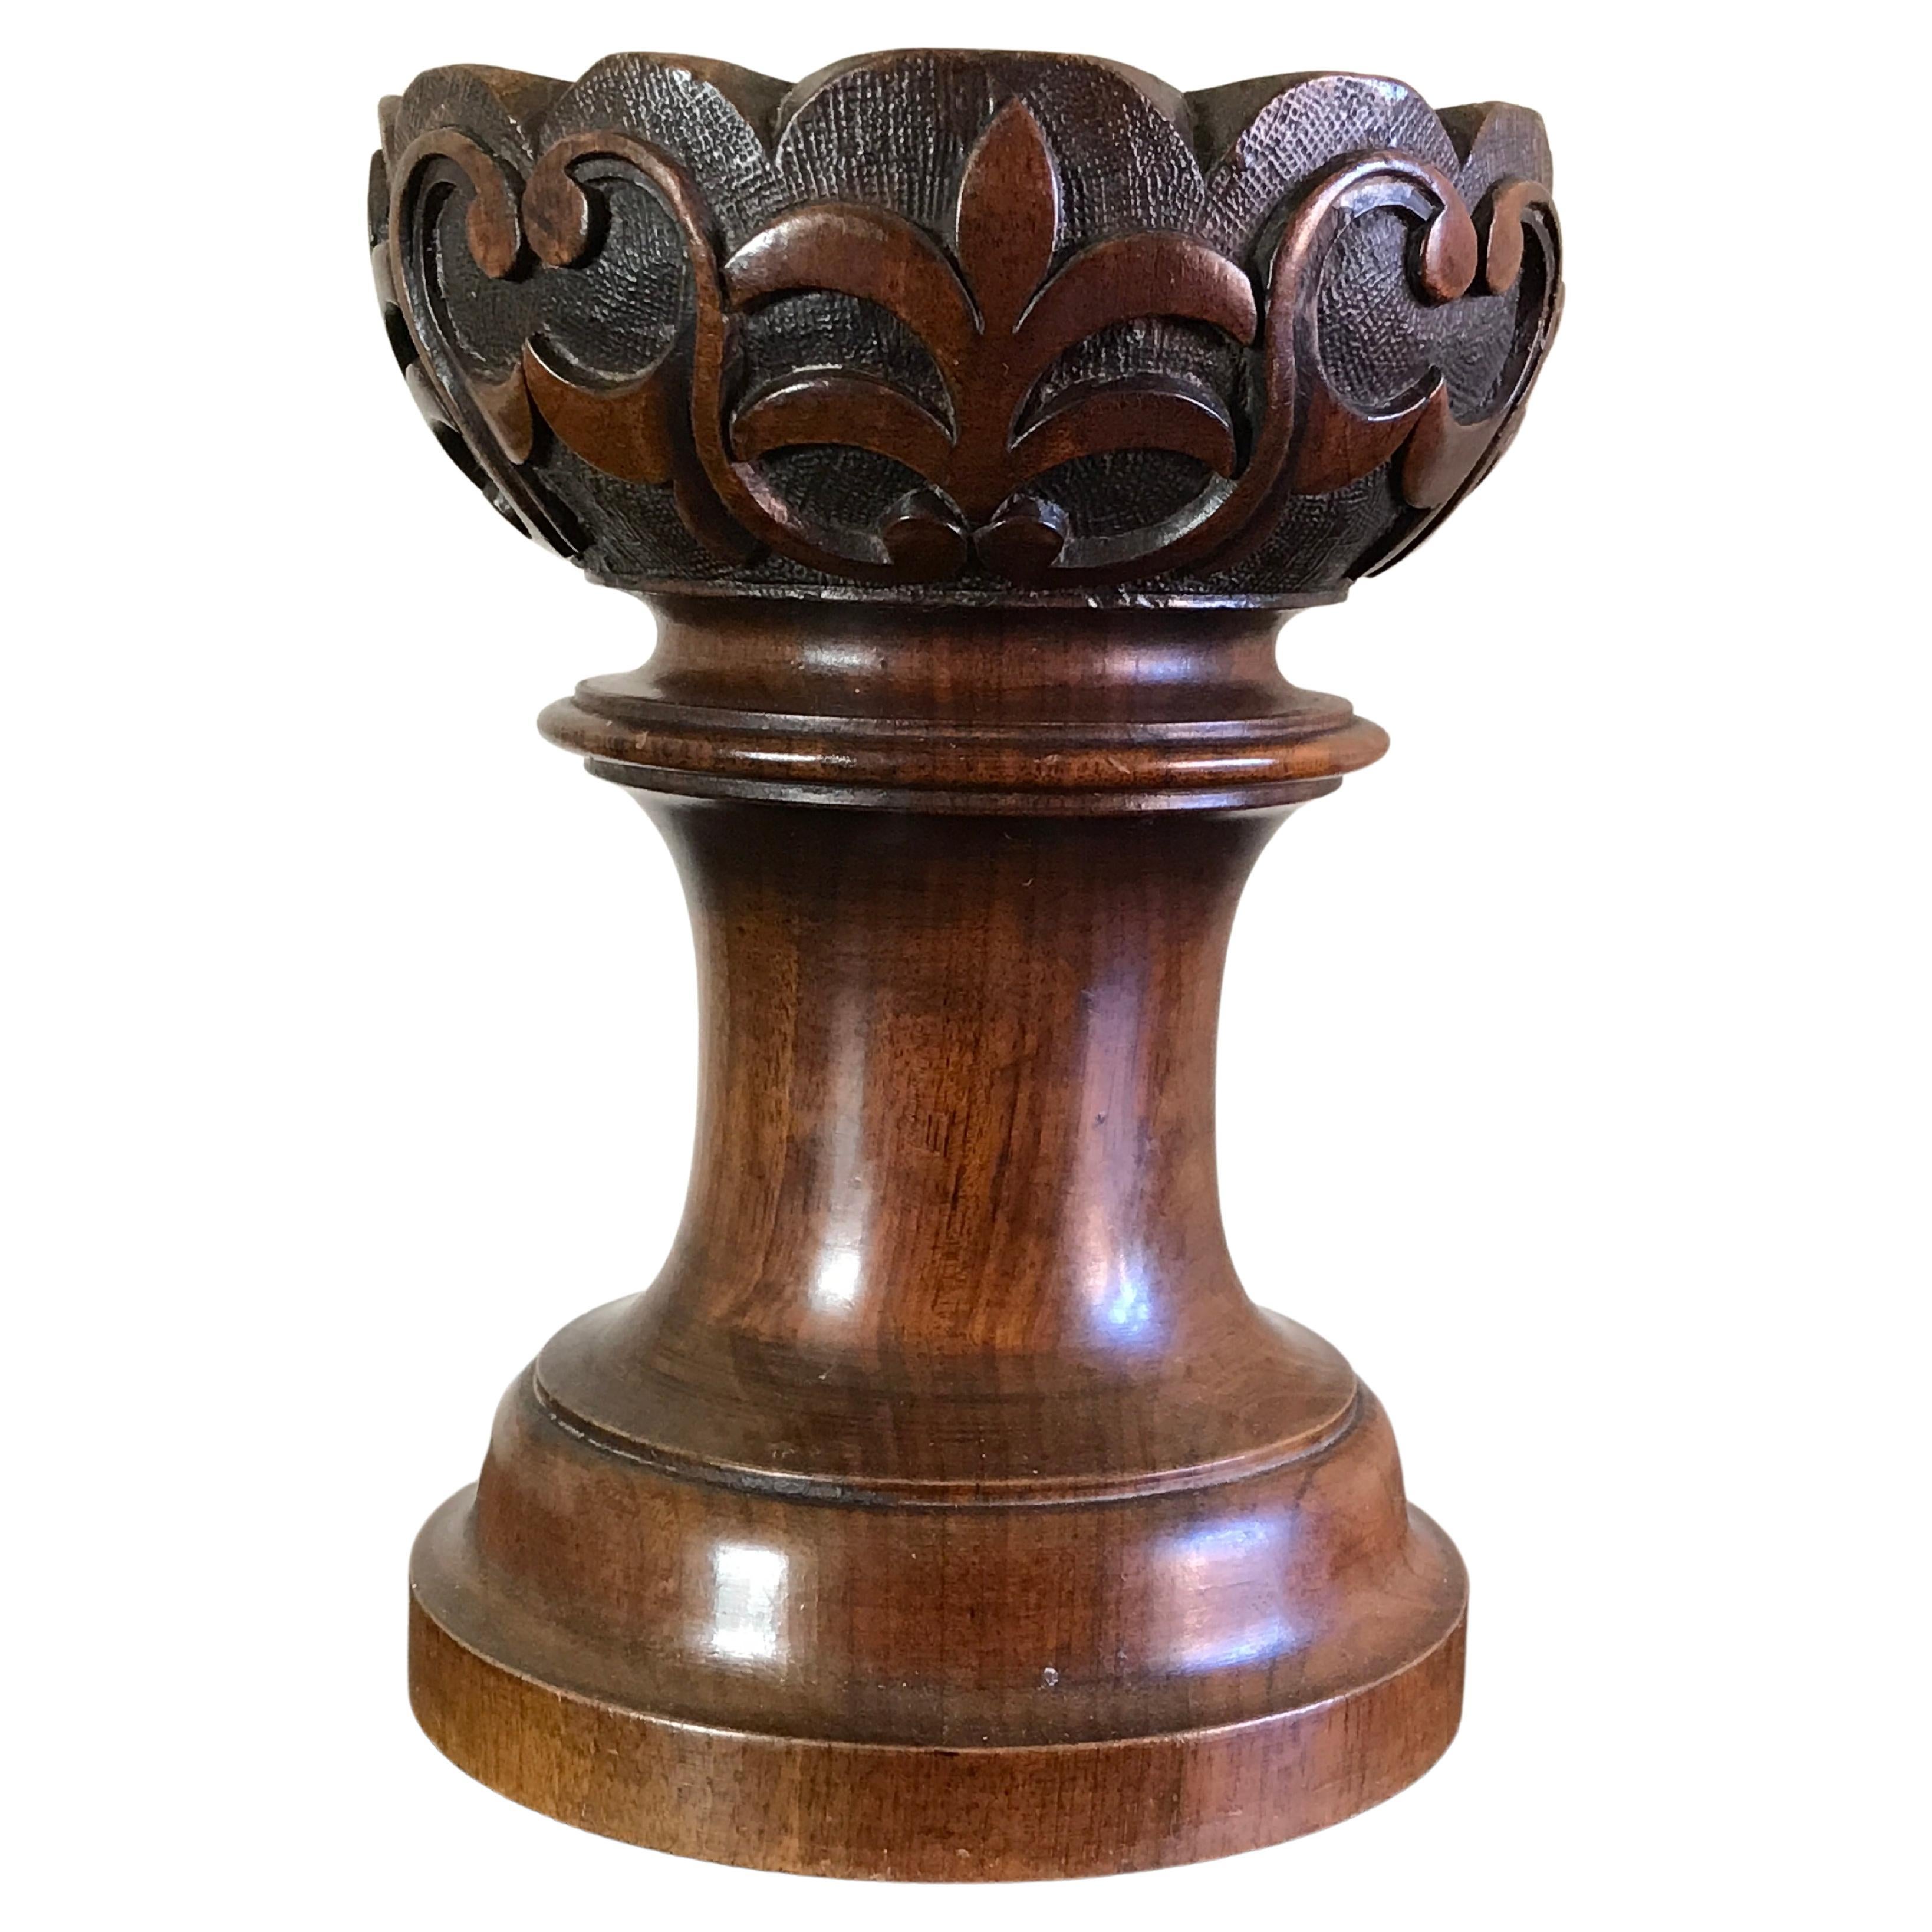 Holder Candle Petite Fours Sweets Mahogany Gothic Revival